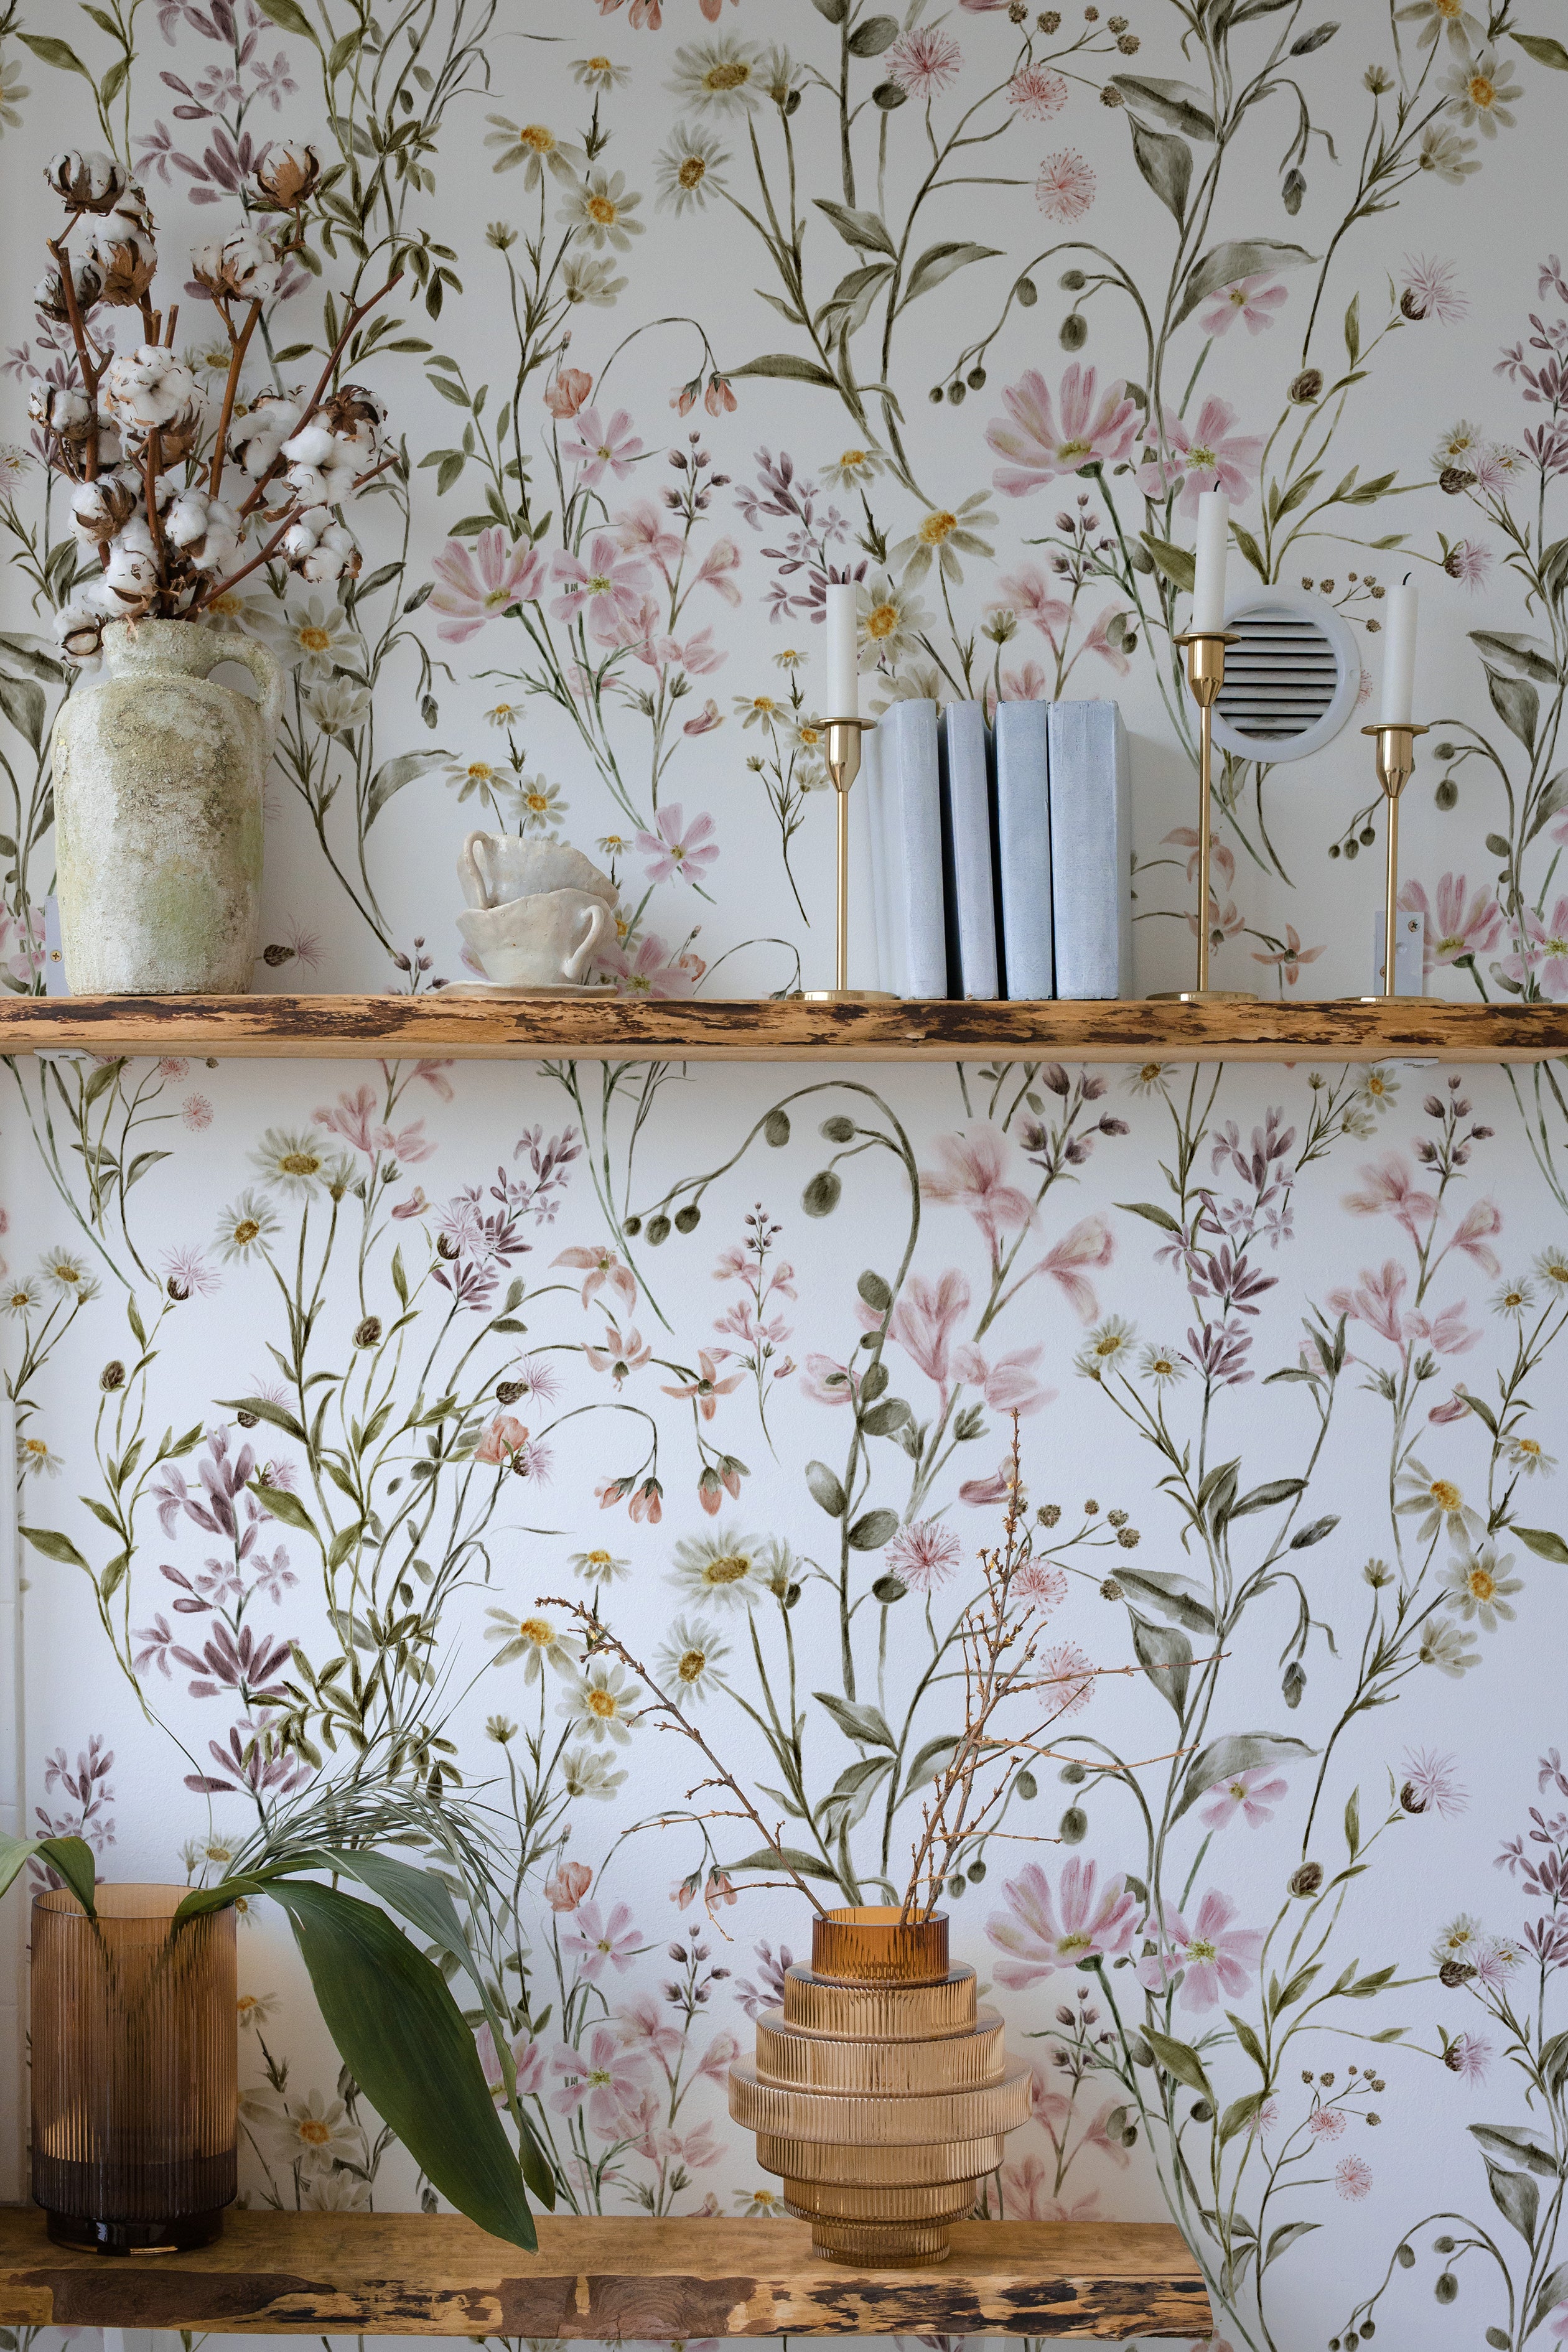 Interior scene with a section of wall covered in WildFloral Wallpaper displaying a delicate watercolor-style pattern of wildflowers in shades of pink, white, and yellow with green foliage. A rustic wooden shelf holds decorative items such as books, a vase with cotton branches, and brass candlesticks, blending with the floral design.